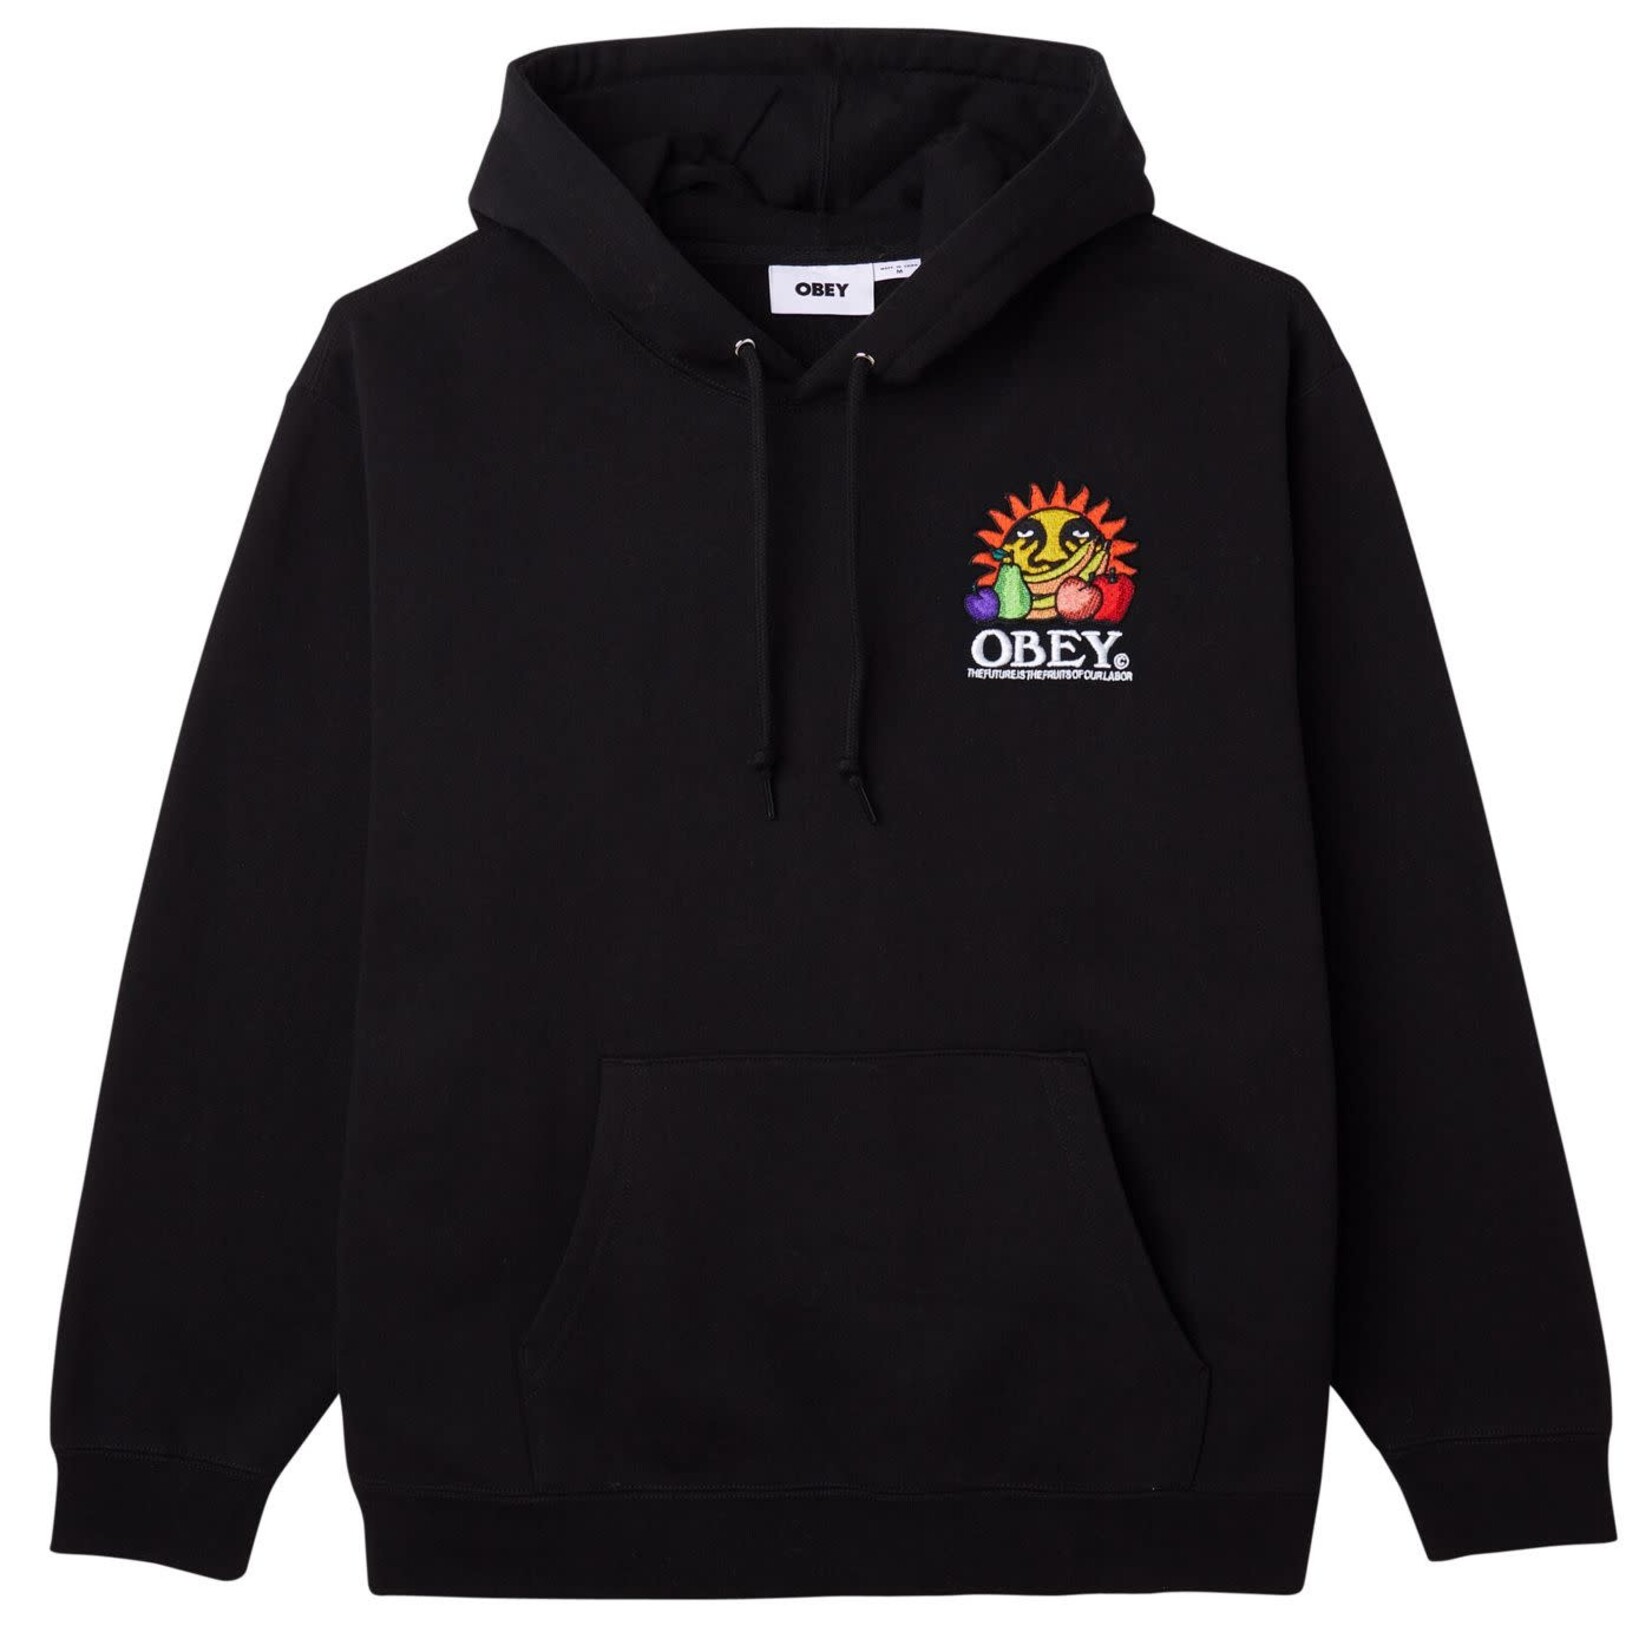 obey Obey hoodie our labor BLK